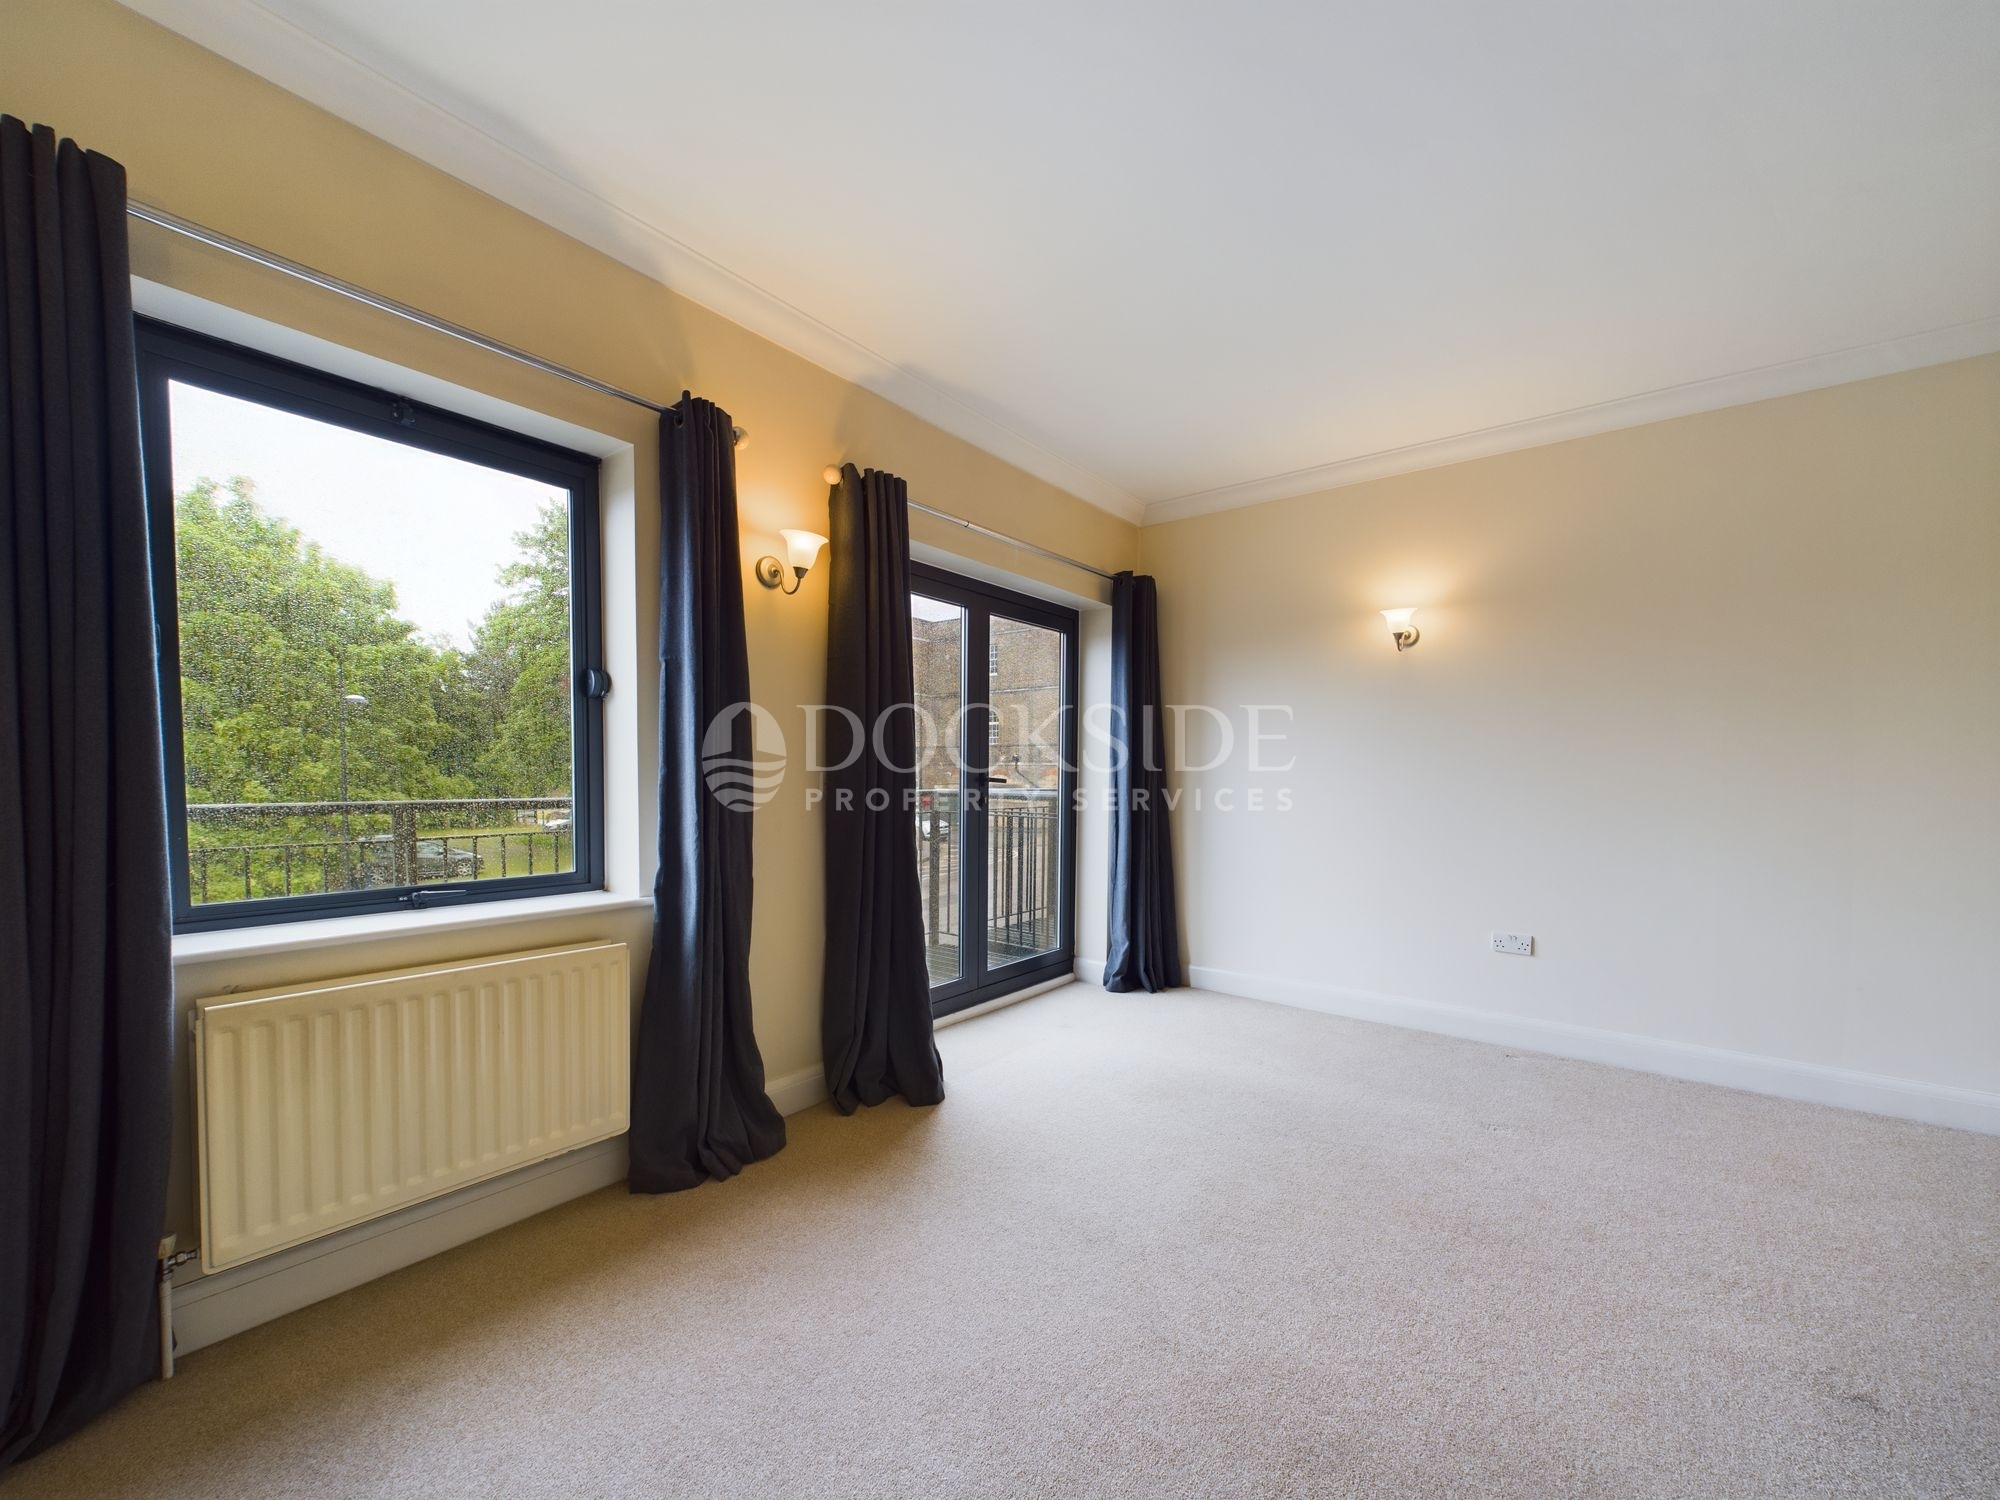 4 bed house to rent in Marc Brunel Way, Chatham  - Property Image 7